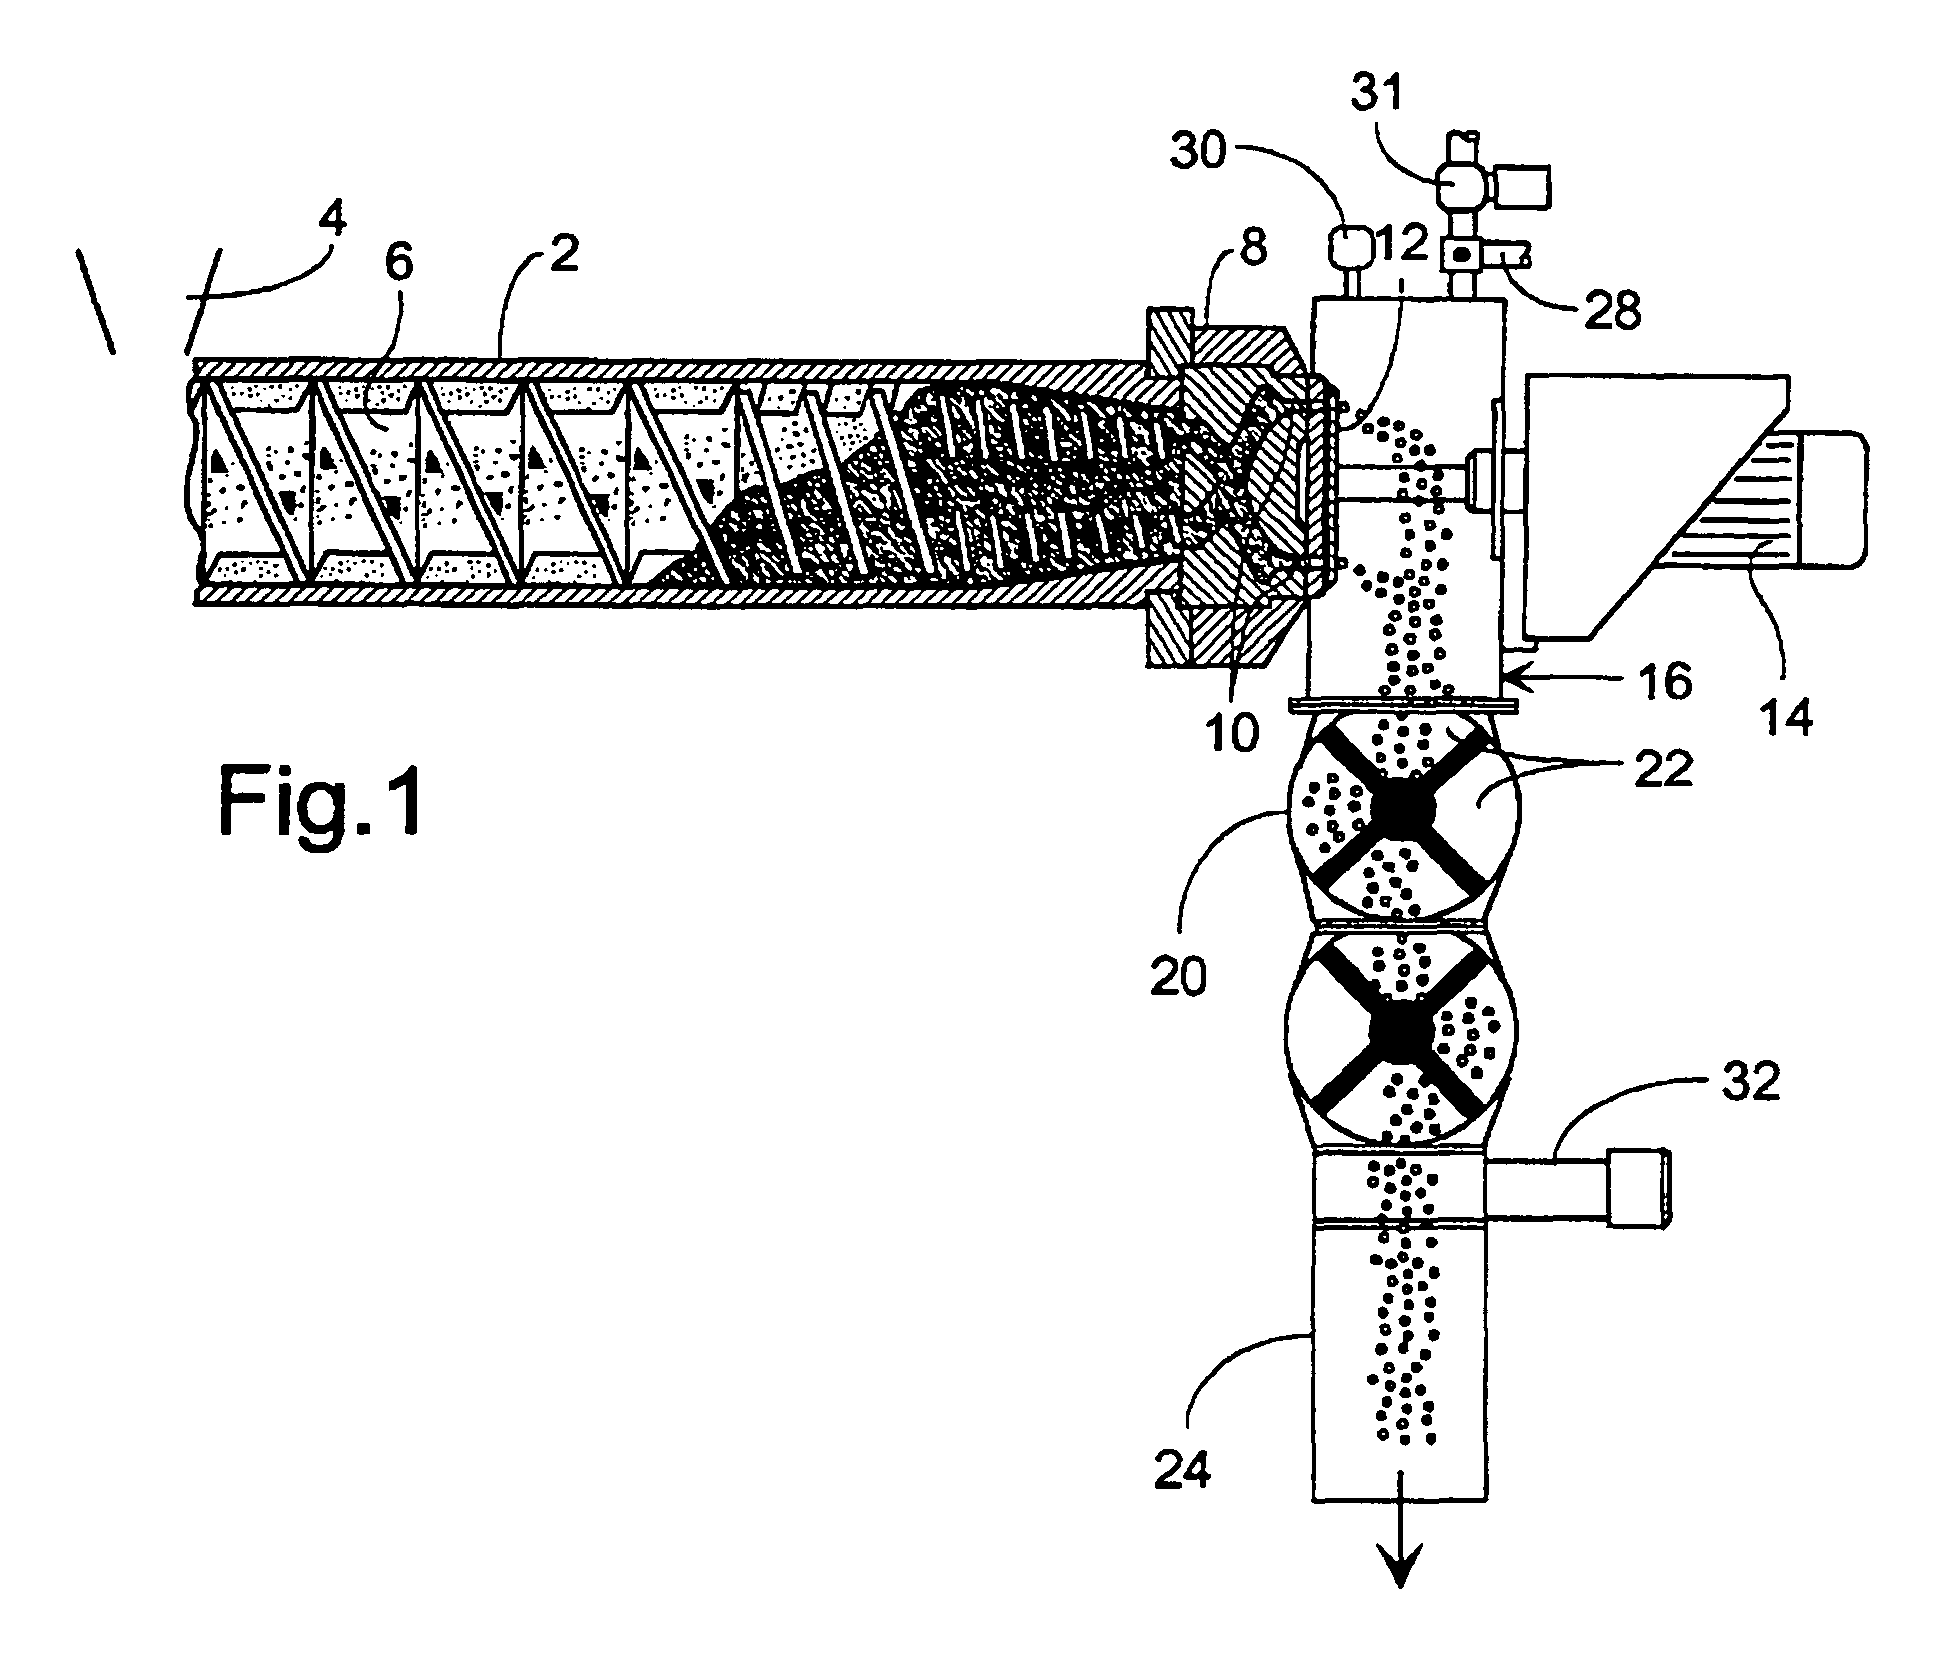 Method and apparatus for extrusion of expanding water holding products such as foodstuff particles or feeding stuff pellets